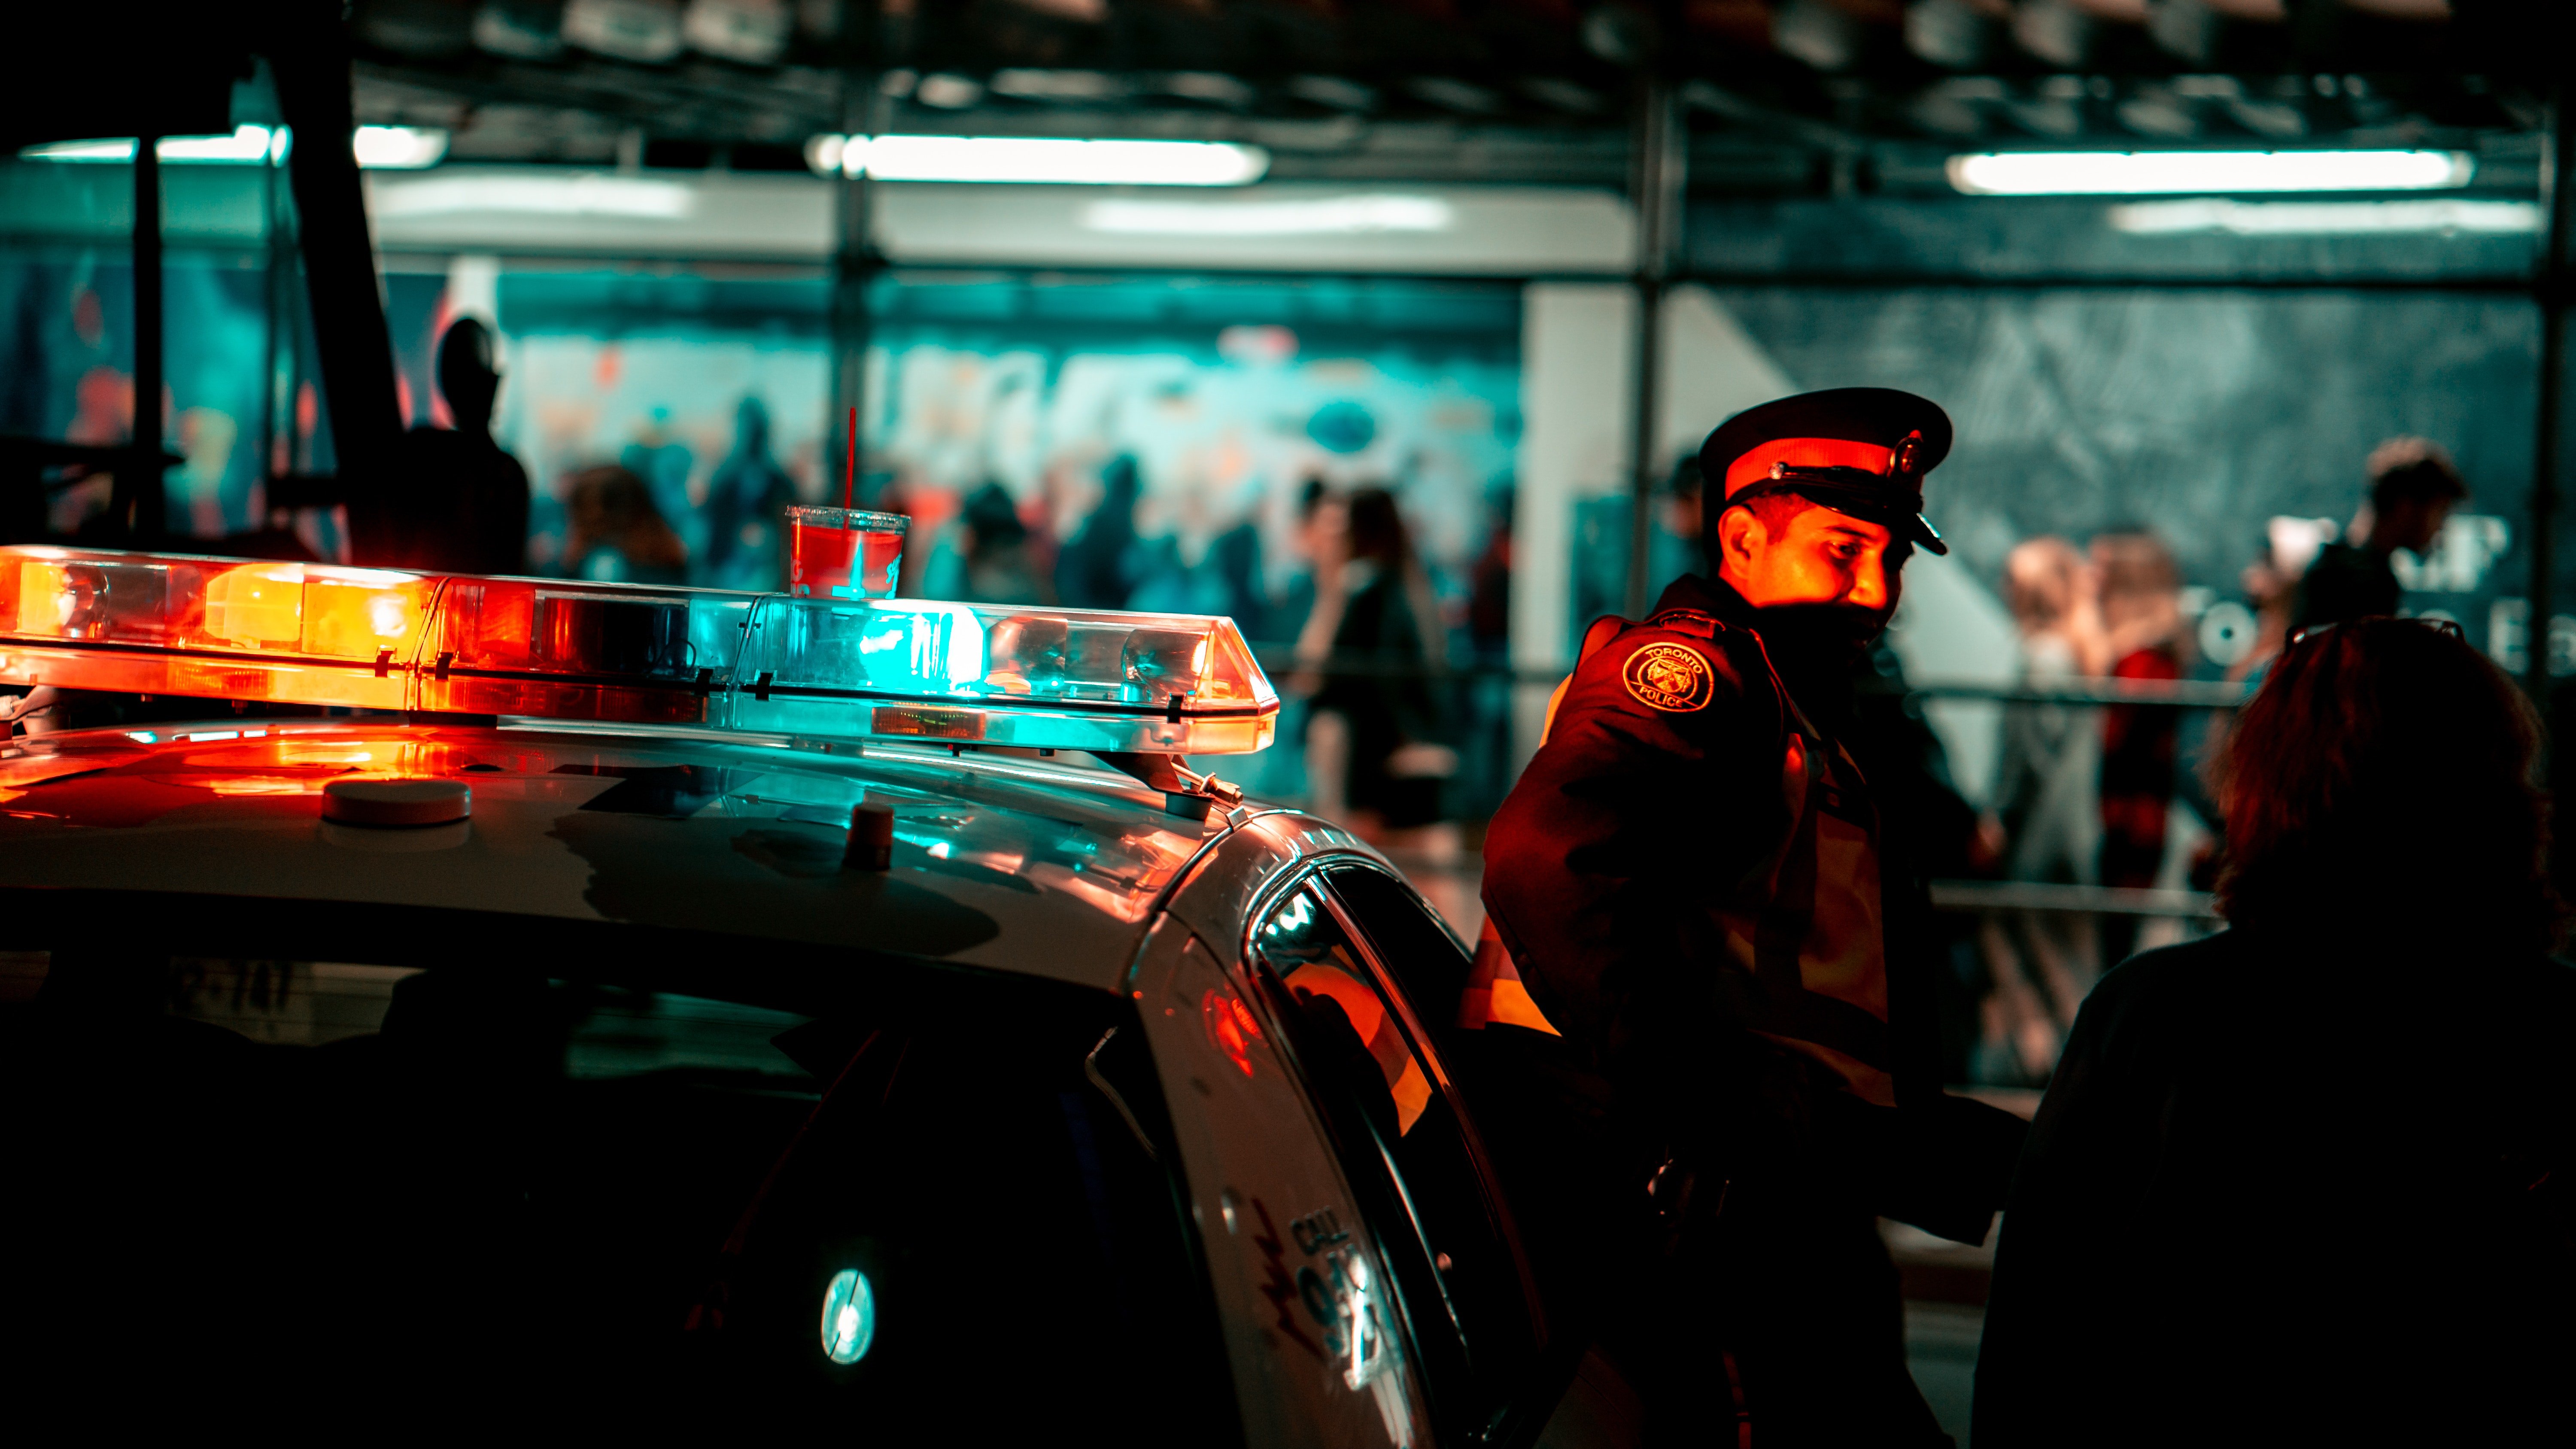 Pictured - An officer standing next to a police vehicle | Source: Pexels